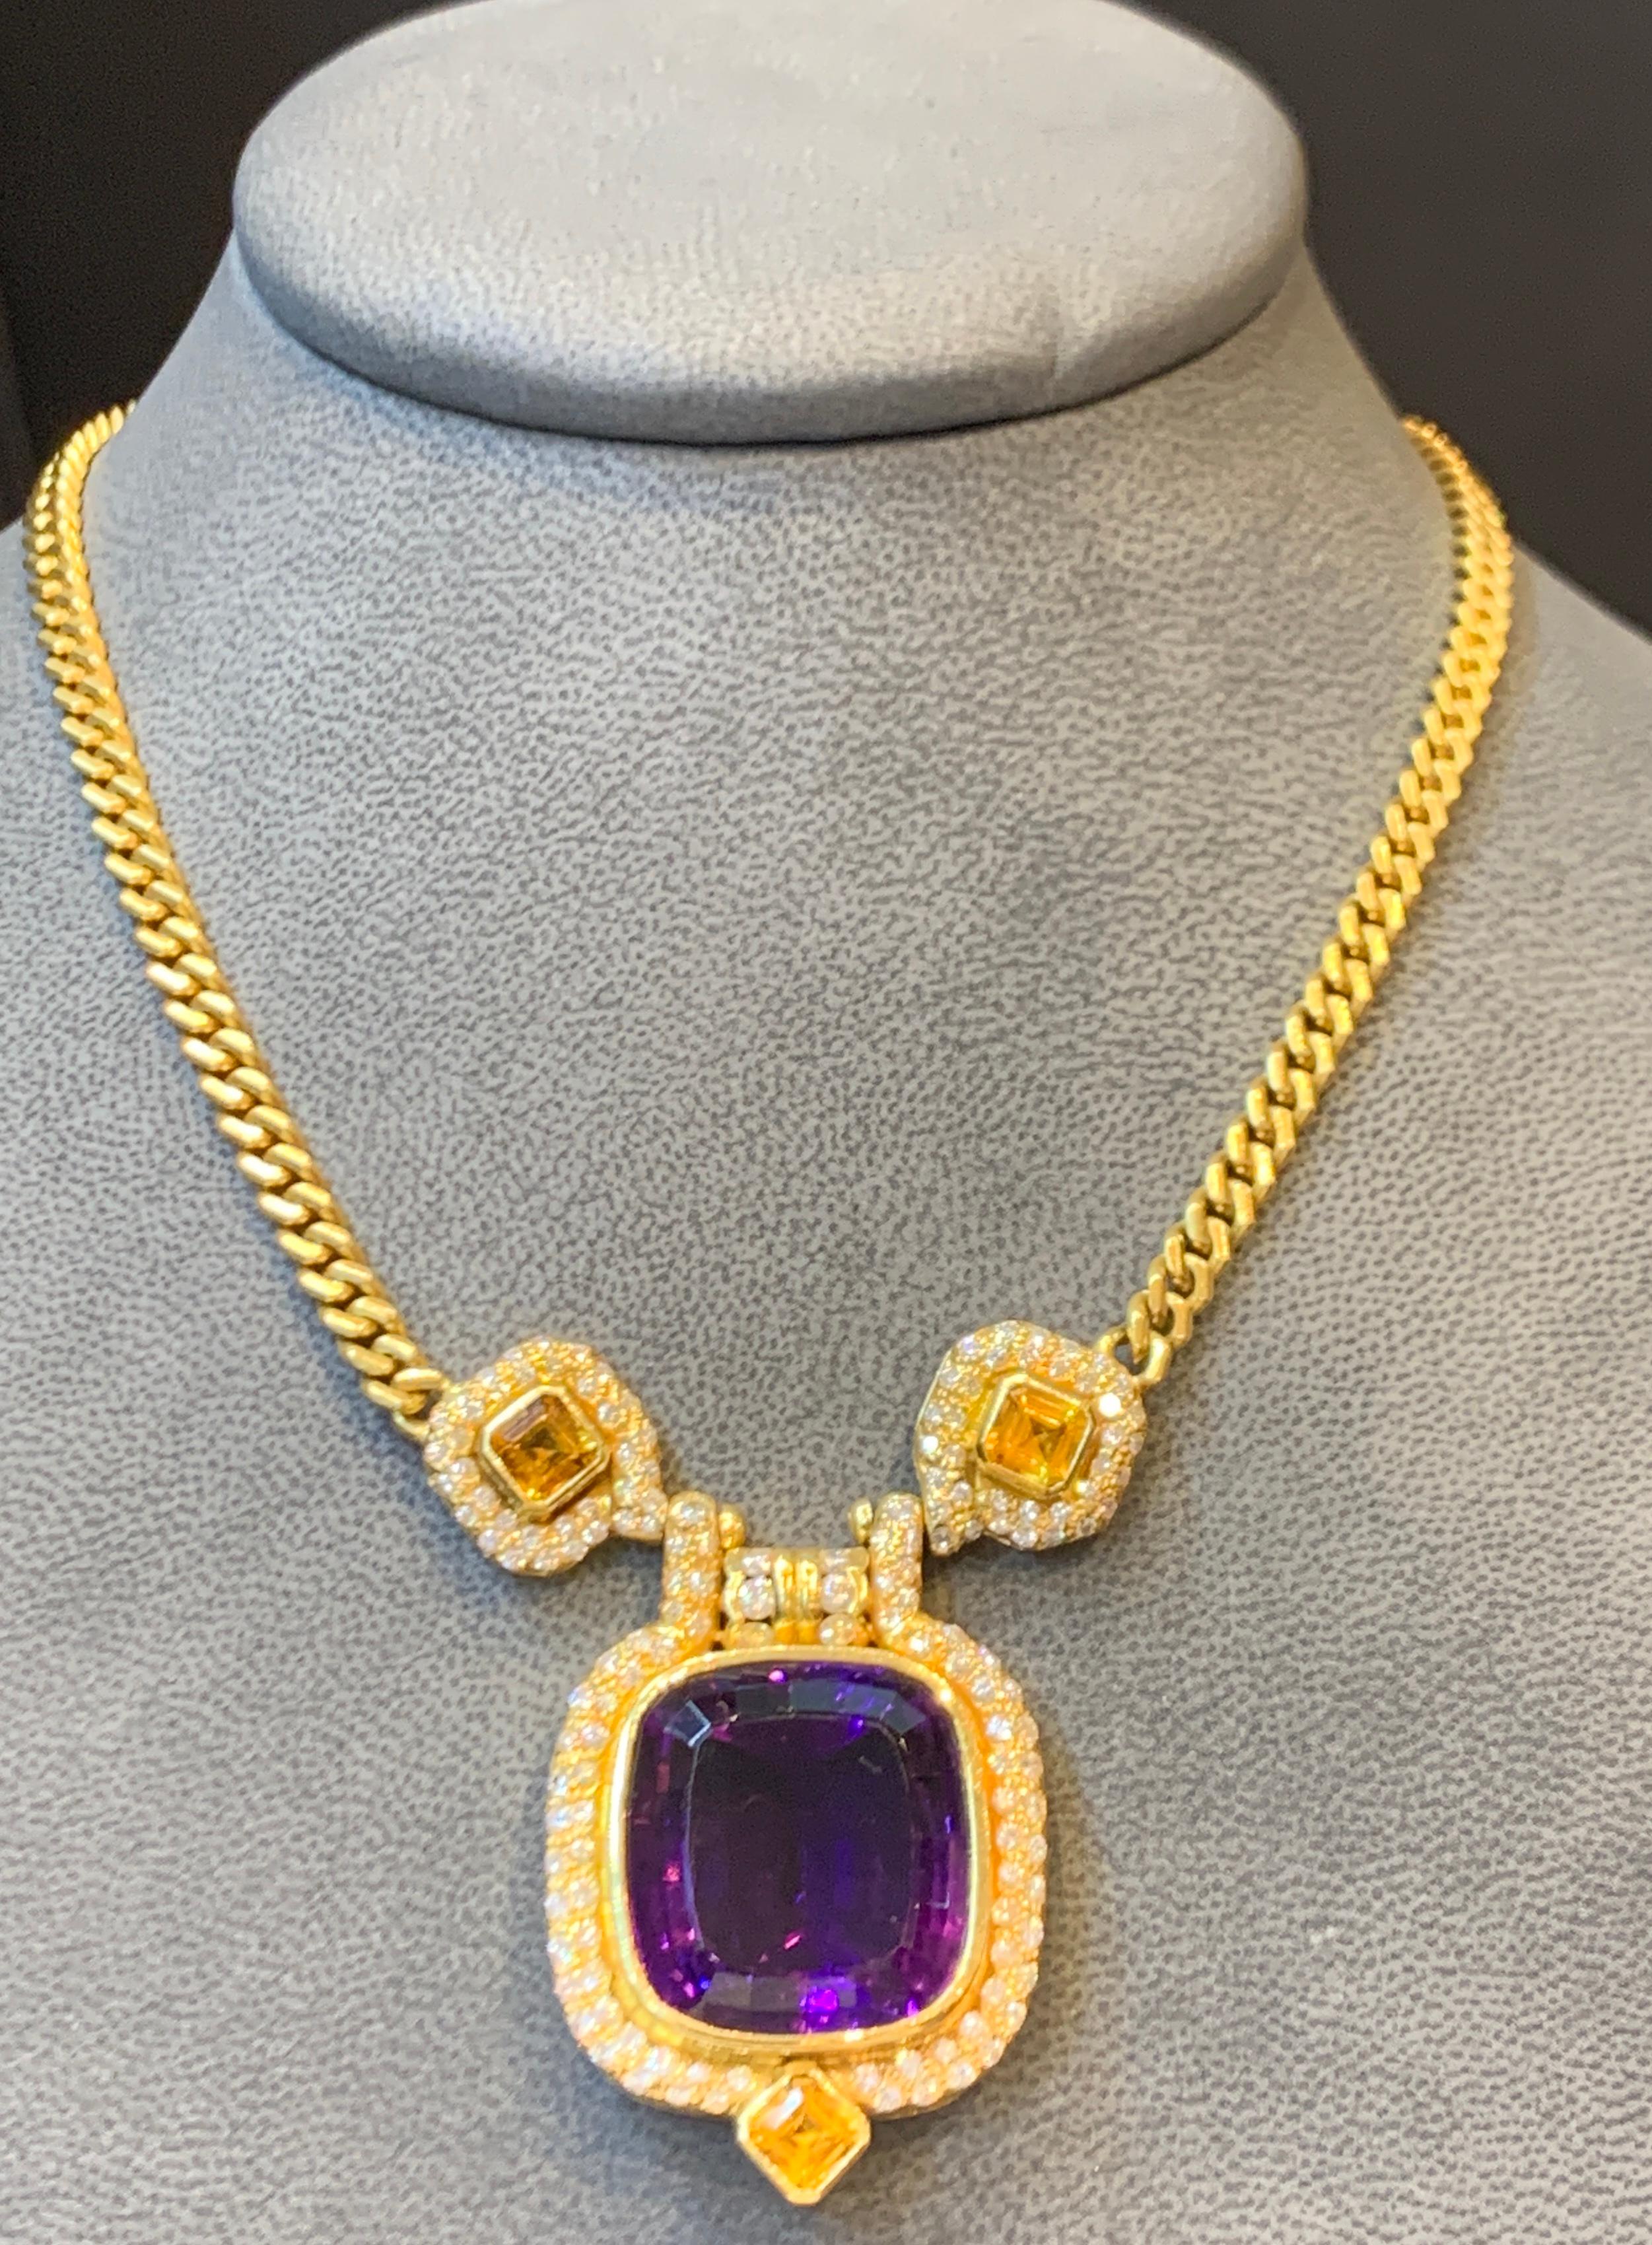 Men's Gold Amethyst & Diamond Necklace , set in 18K Yellow Gold 
74.5 Grams 
Amethyst Weight:  approx 47.37 Cts
3 yellow citrines, Citrine Weight: approx 2.80 Cts
152 diamonds, Diamond Weight: approx 3.25
Chain Measurements: 14